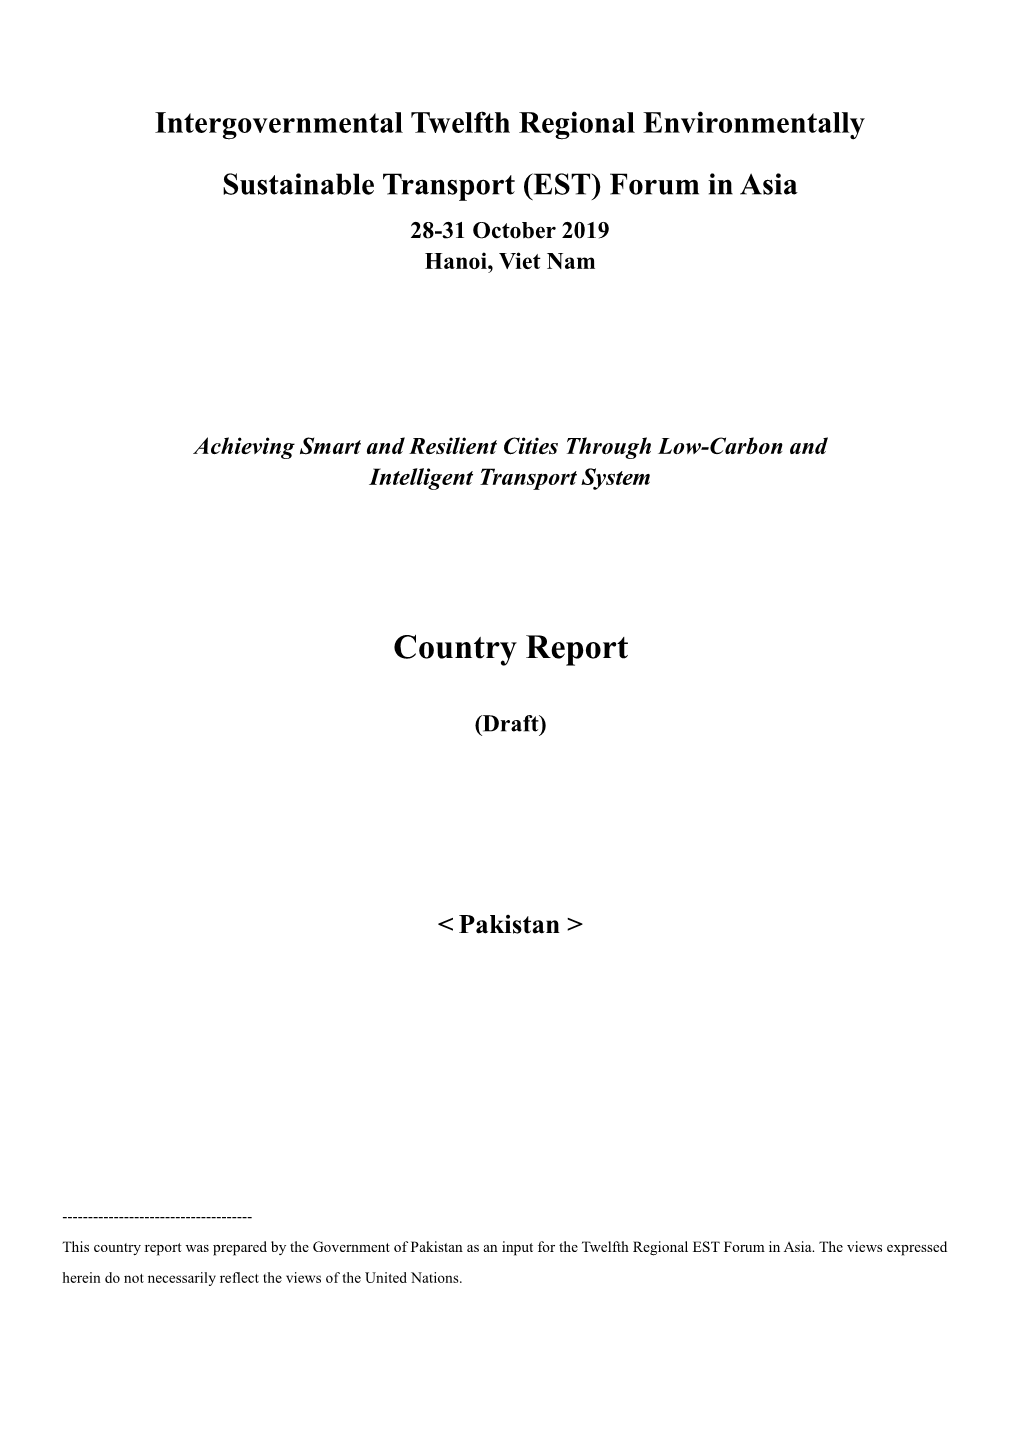 Country Report (Pakistan)